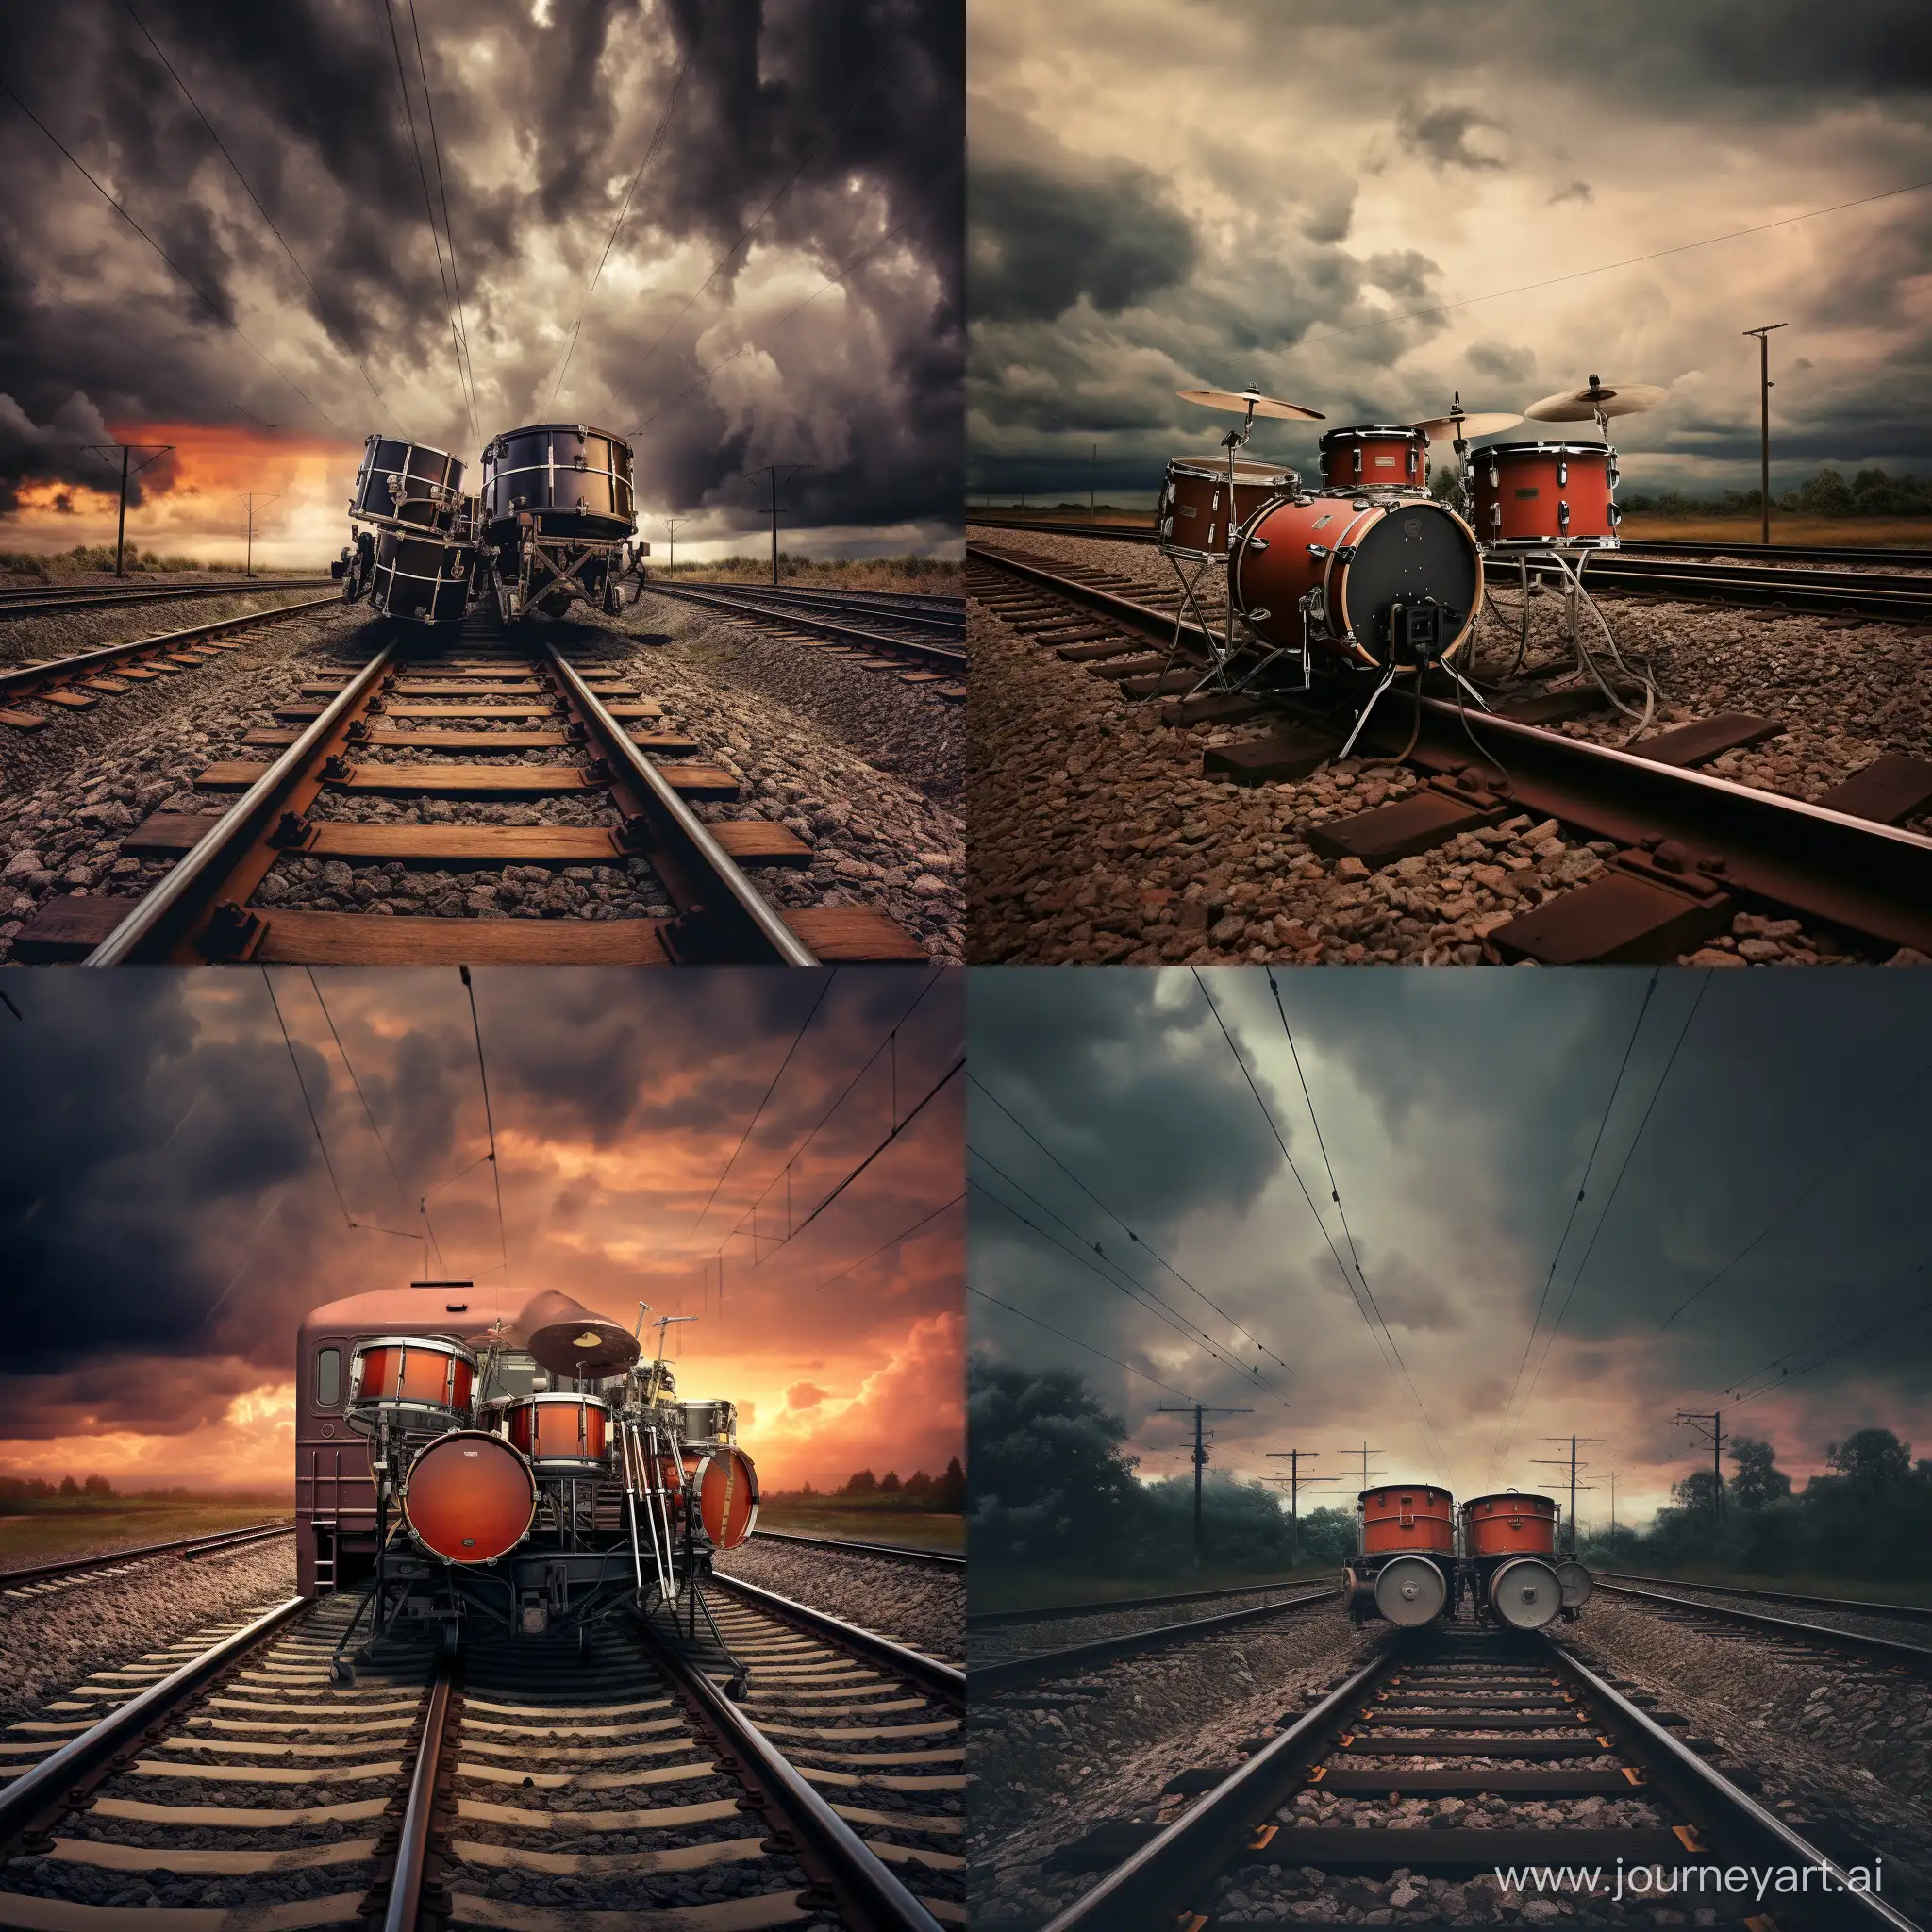 Dynamic-Drum-Kit-on-Moving-Train-Carriage-under-Stormy-Sky